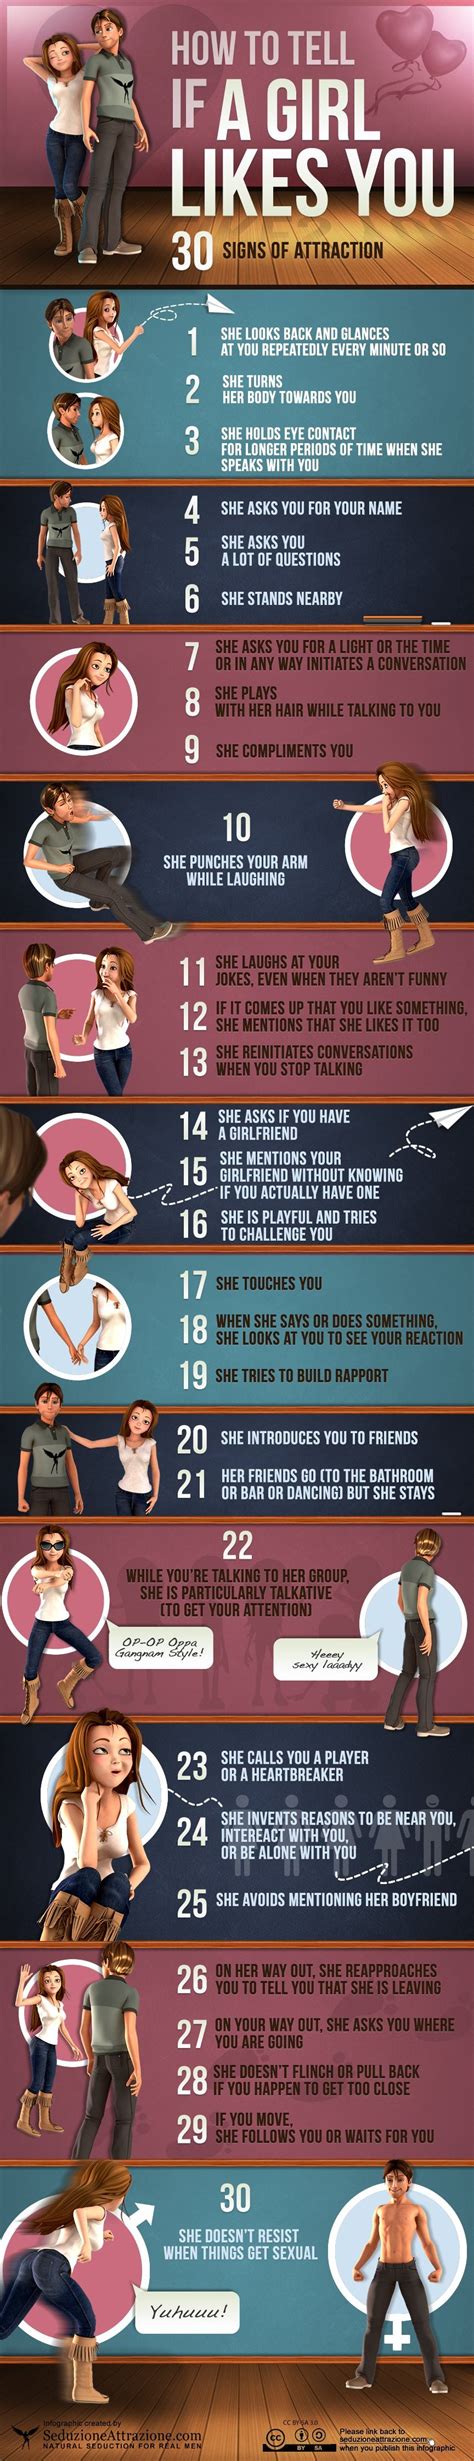 30 Signs Of Attraction If A Girl Likes You [infographic] Signs Of Attraction Flirting Body